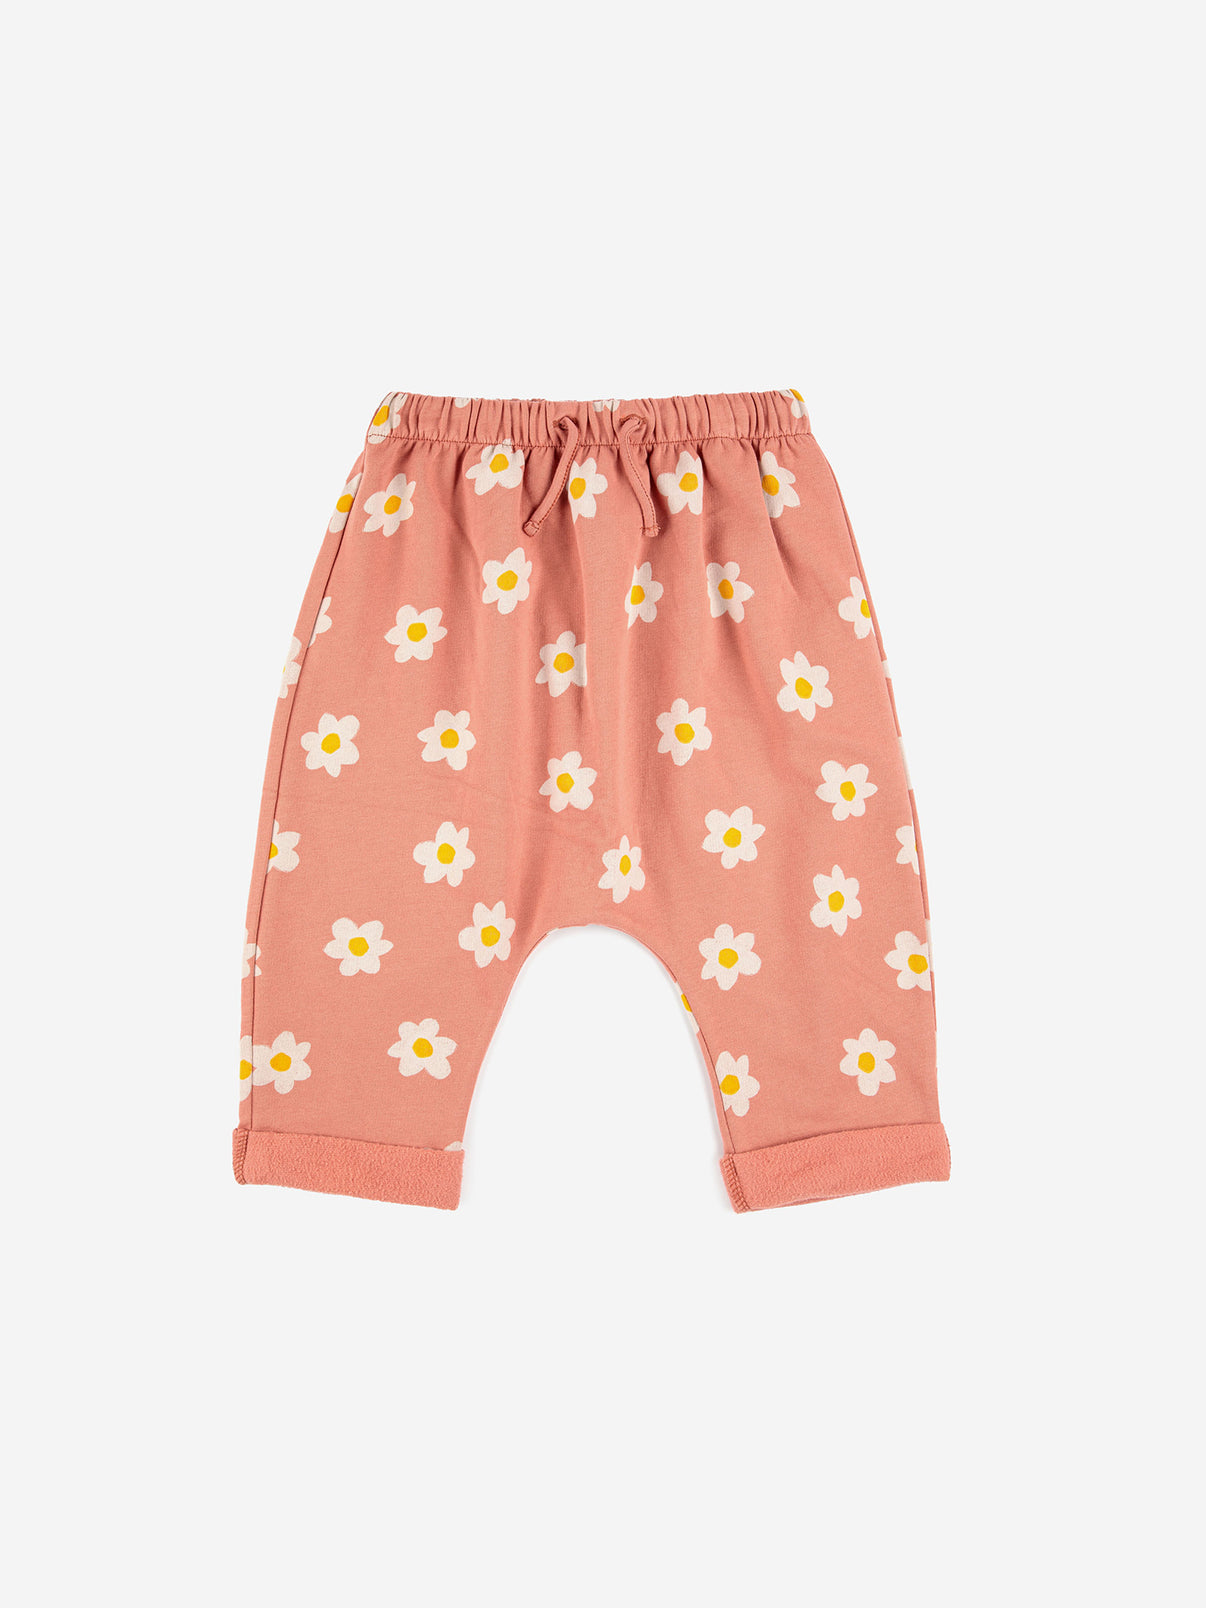 Bobo Choses Baby Little Flower All Over Pants - 95% organic cotton 5% elastane salmon pink trousers. Designed with adjustable waistband and turn up hem. It has a baggy fit. Made in Portugal.